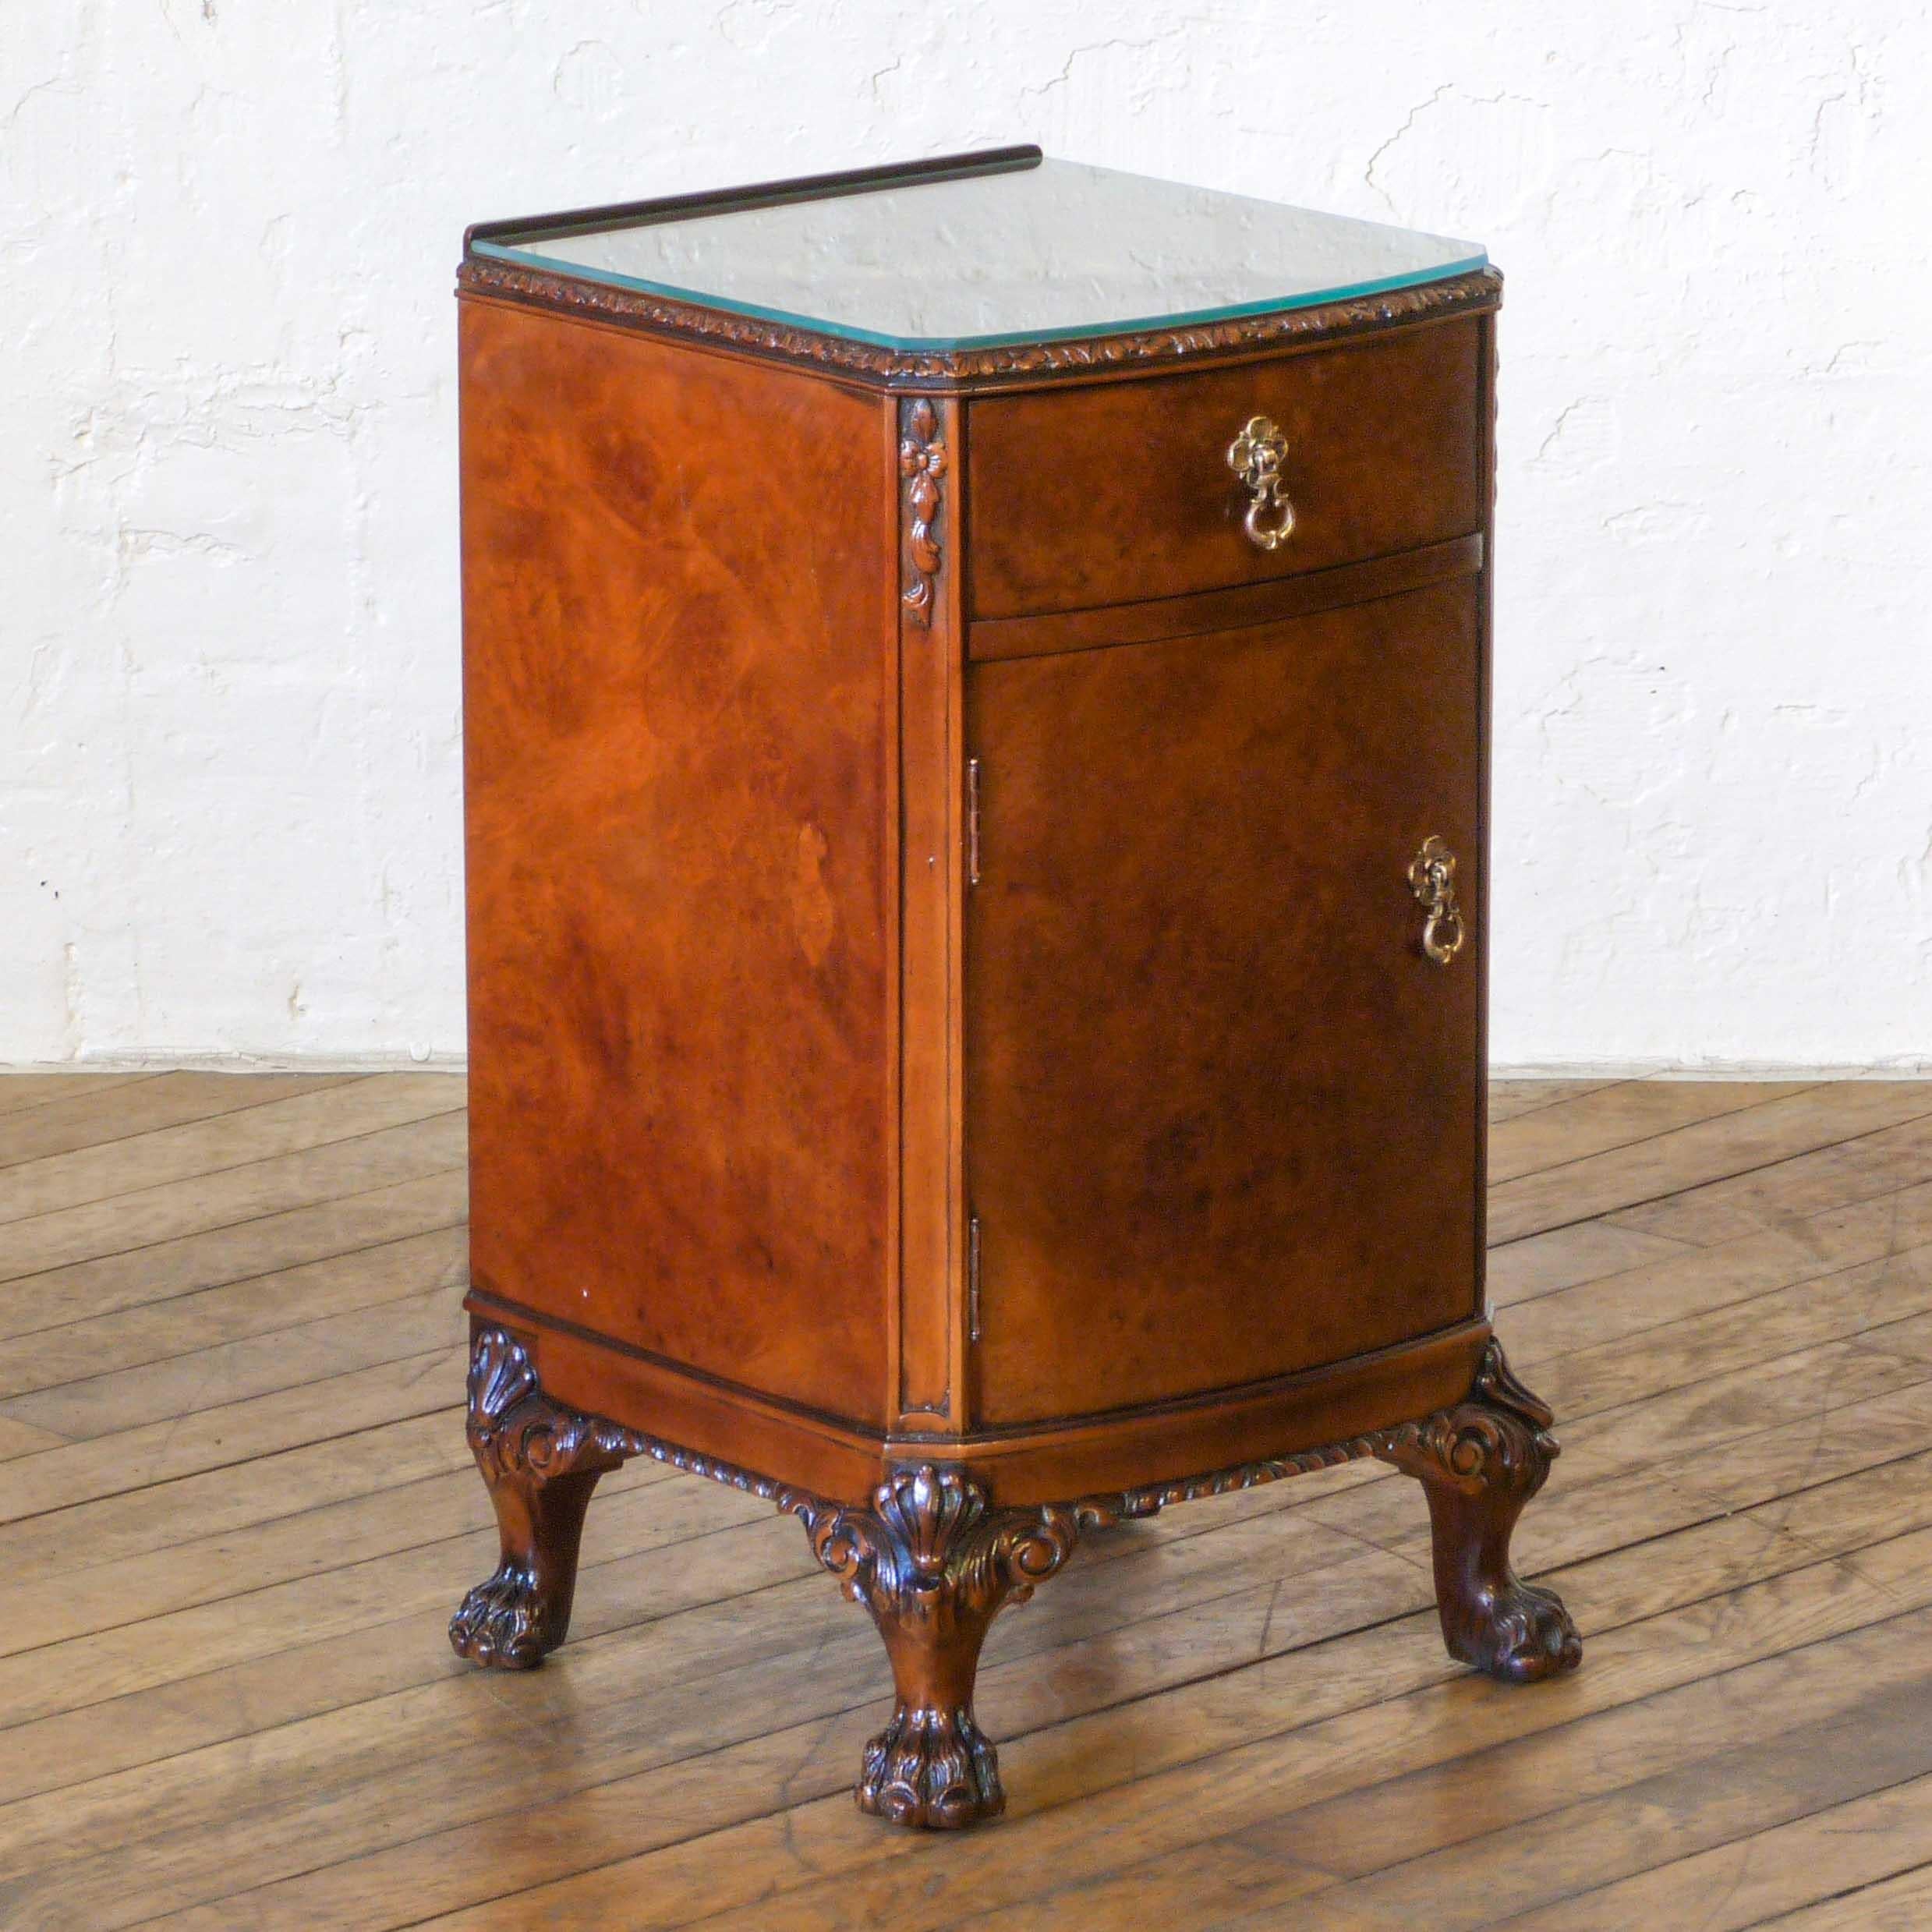 A beautiful pair of Queen Anne style bedside cabinets finished in well figured burr walnut. The right hand cabinet has an open shelf above a cupboard that has a Berick furniture label on the rear. The left hand cabinet has a drawer above a larger